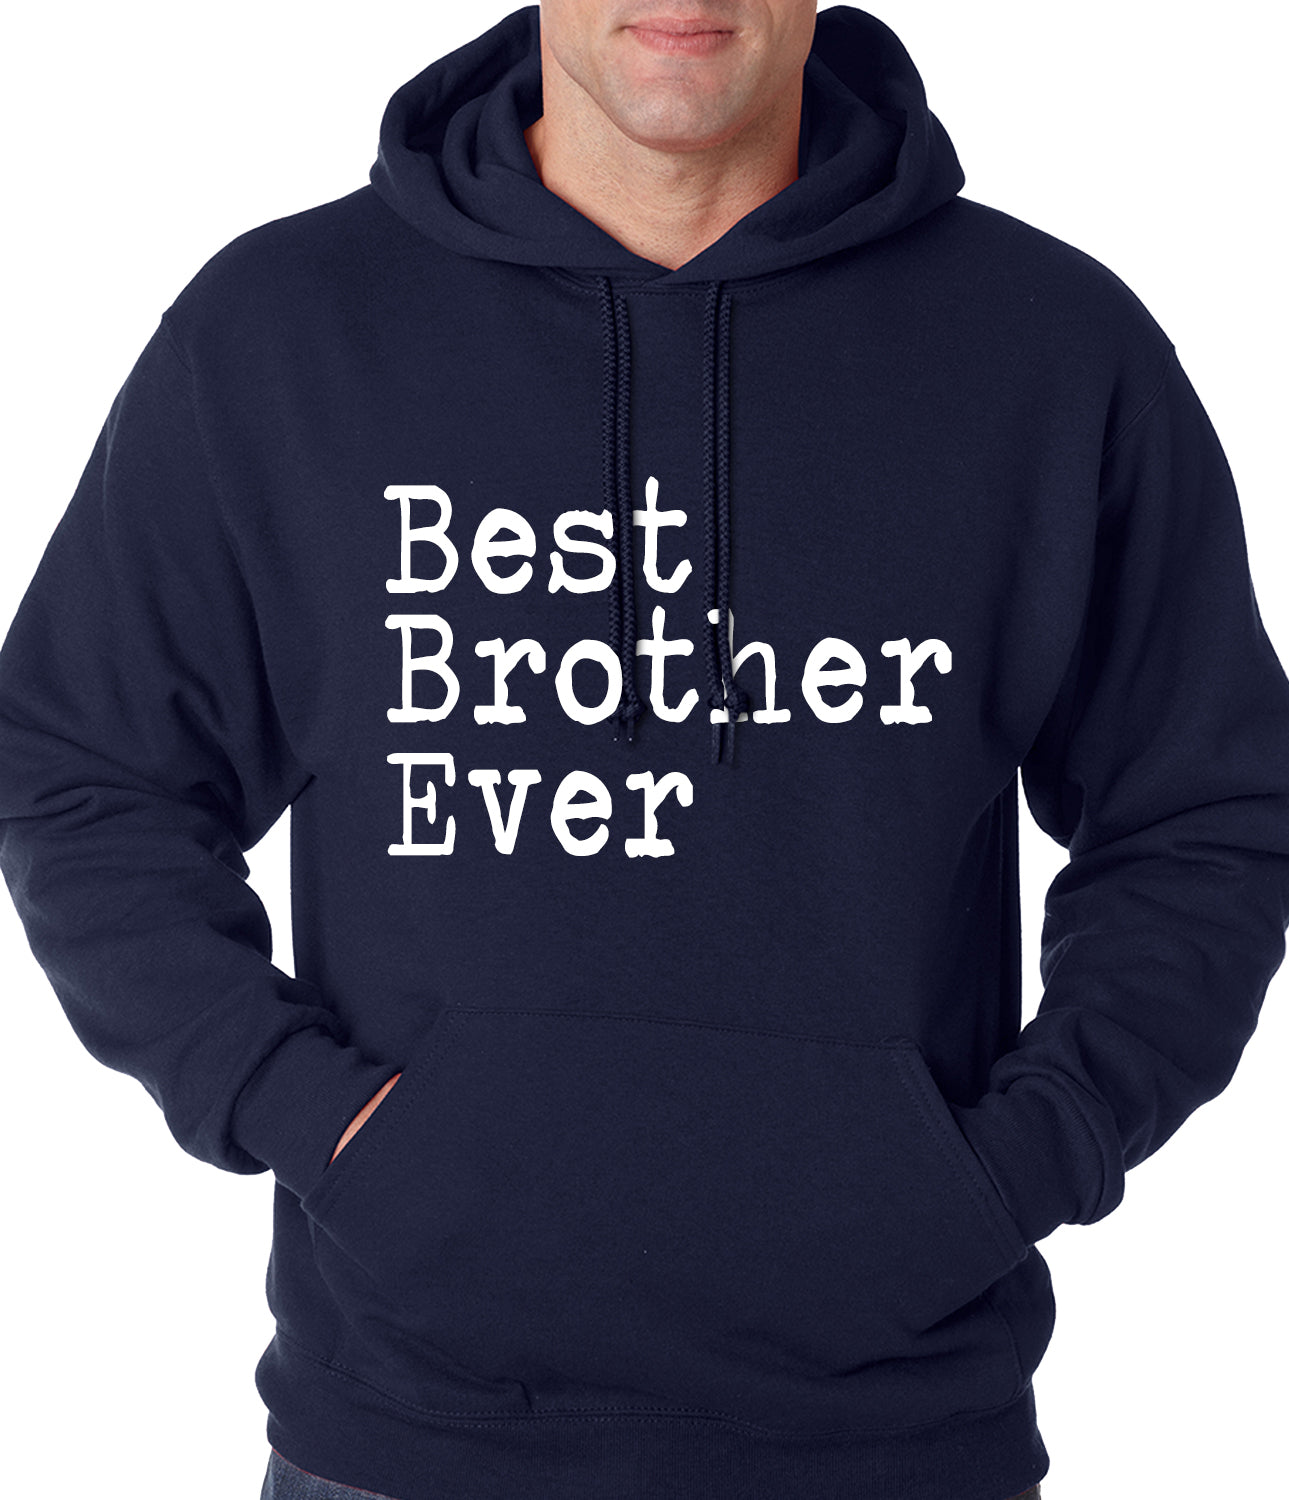 Best Brother Ever Adult Hoodie NavyBlue